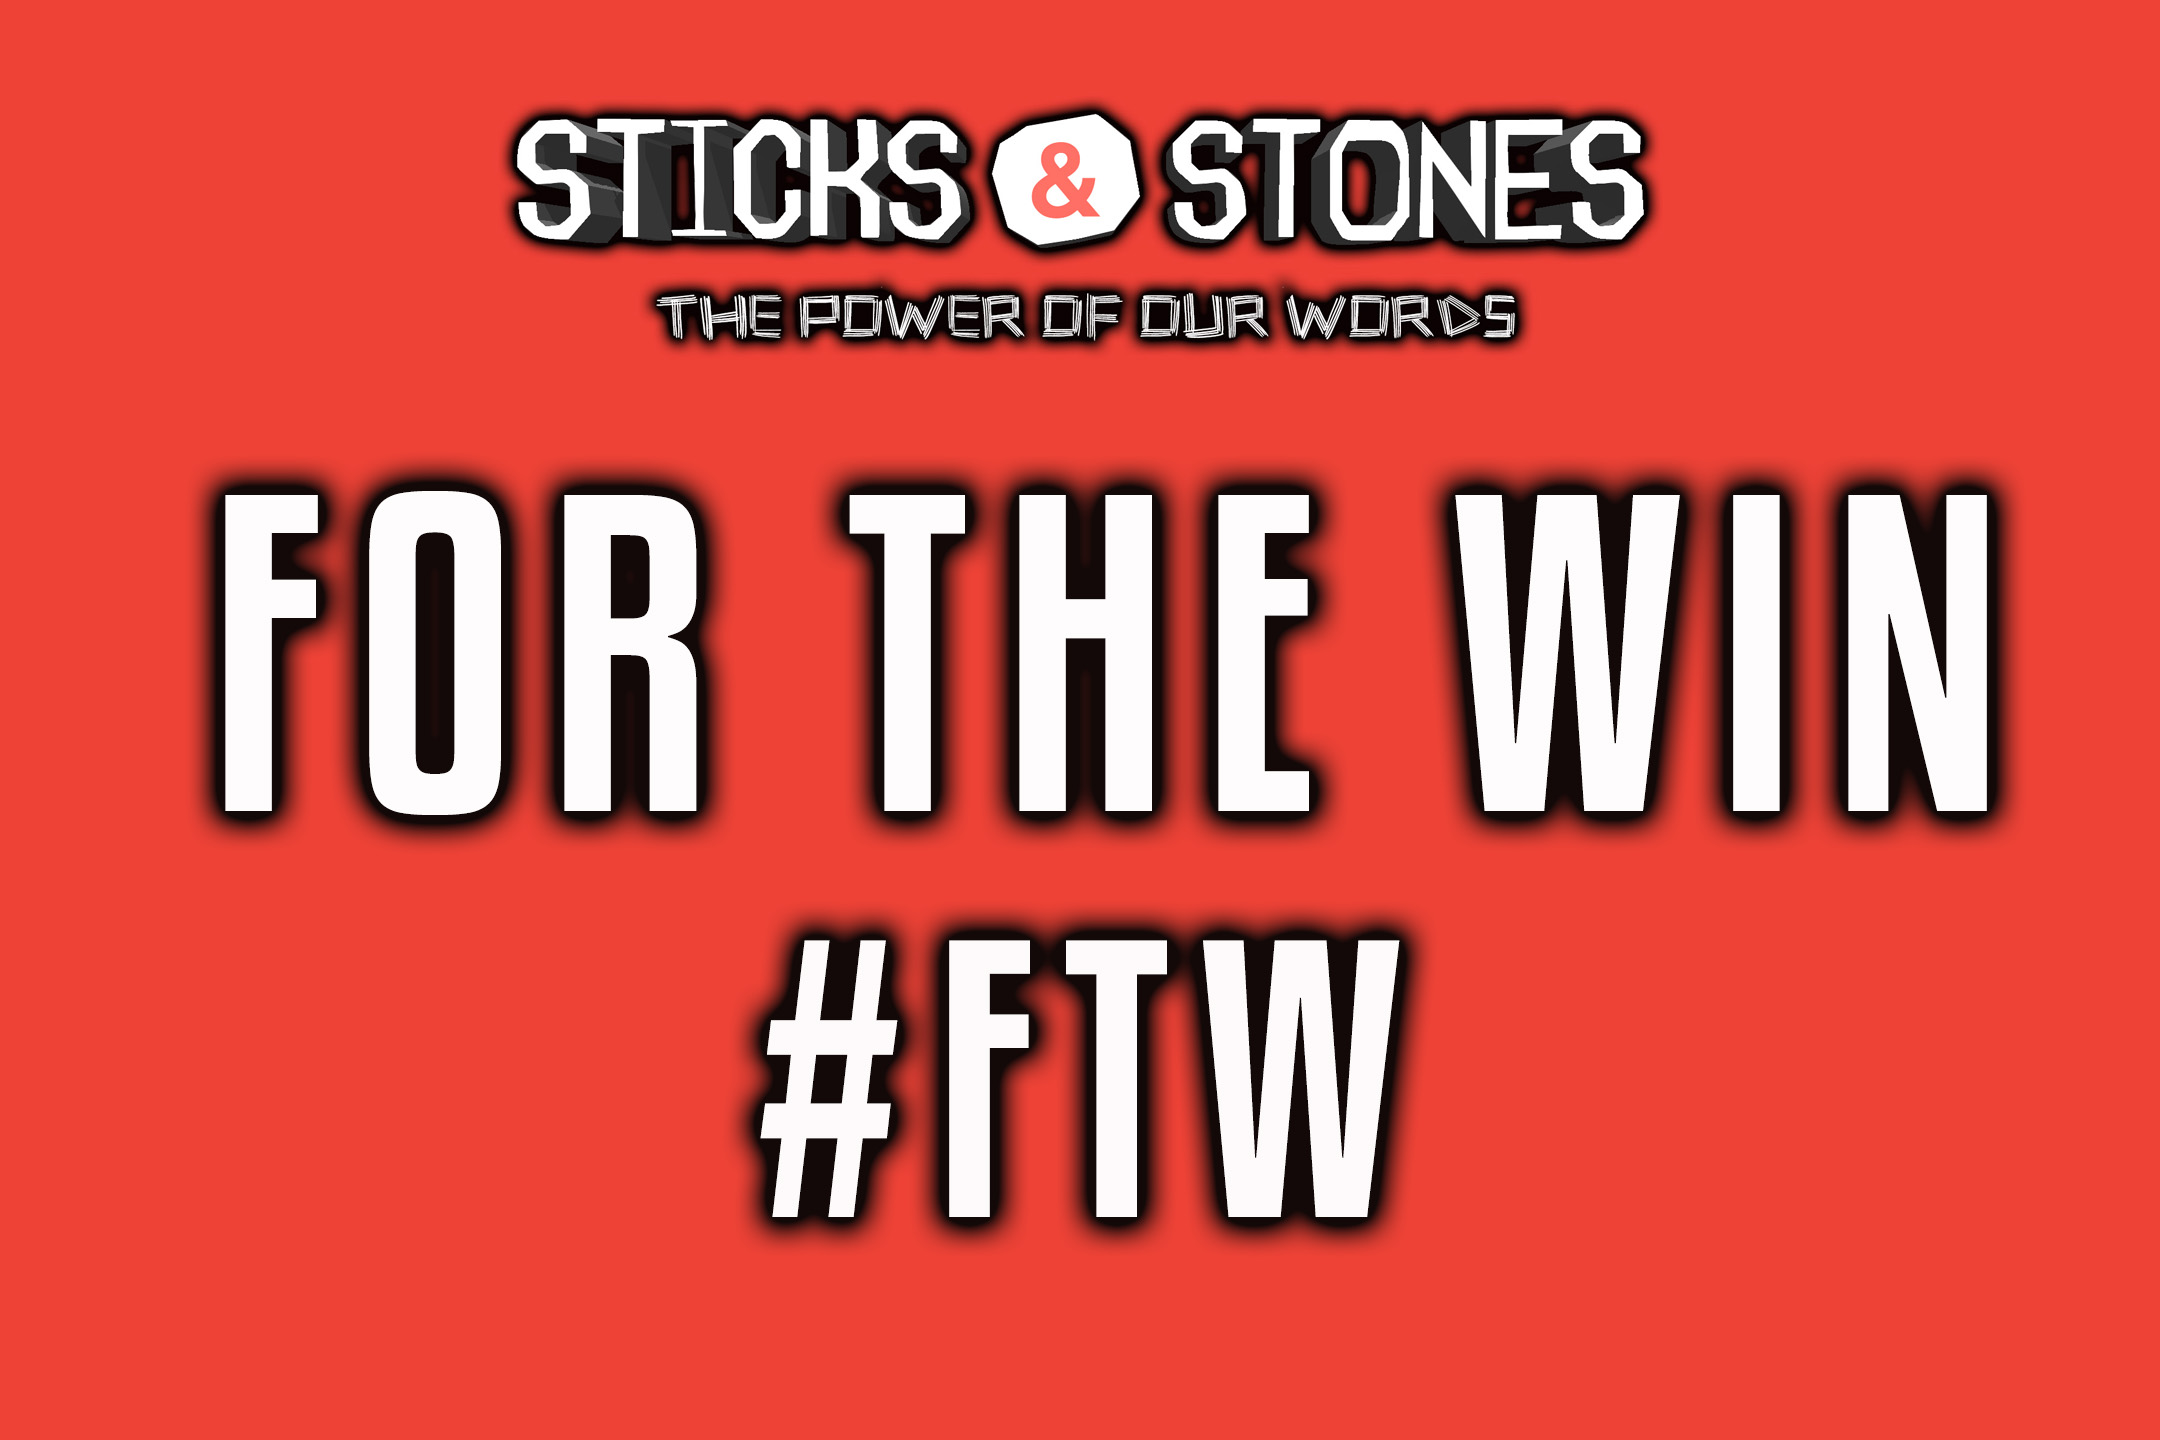 Pastor Huey: Sticks and Stones- The Power of Our Words | For The Win #FTW (08/16/15)